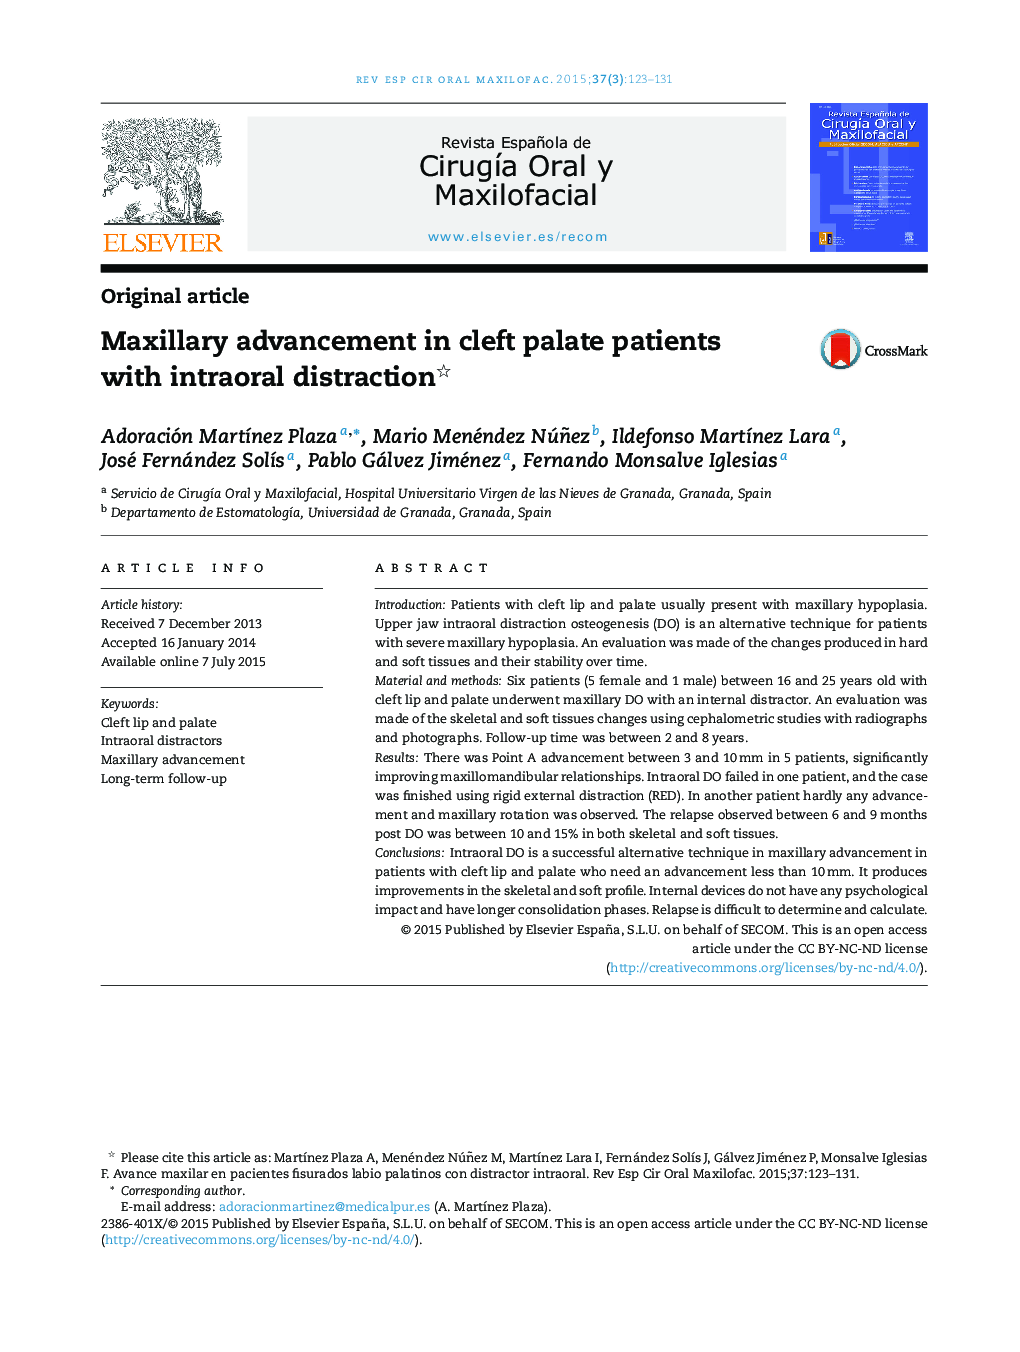 Maxillary advancement in cleft palate patients with intraoral distraction 